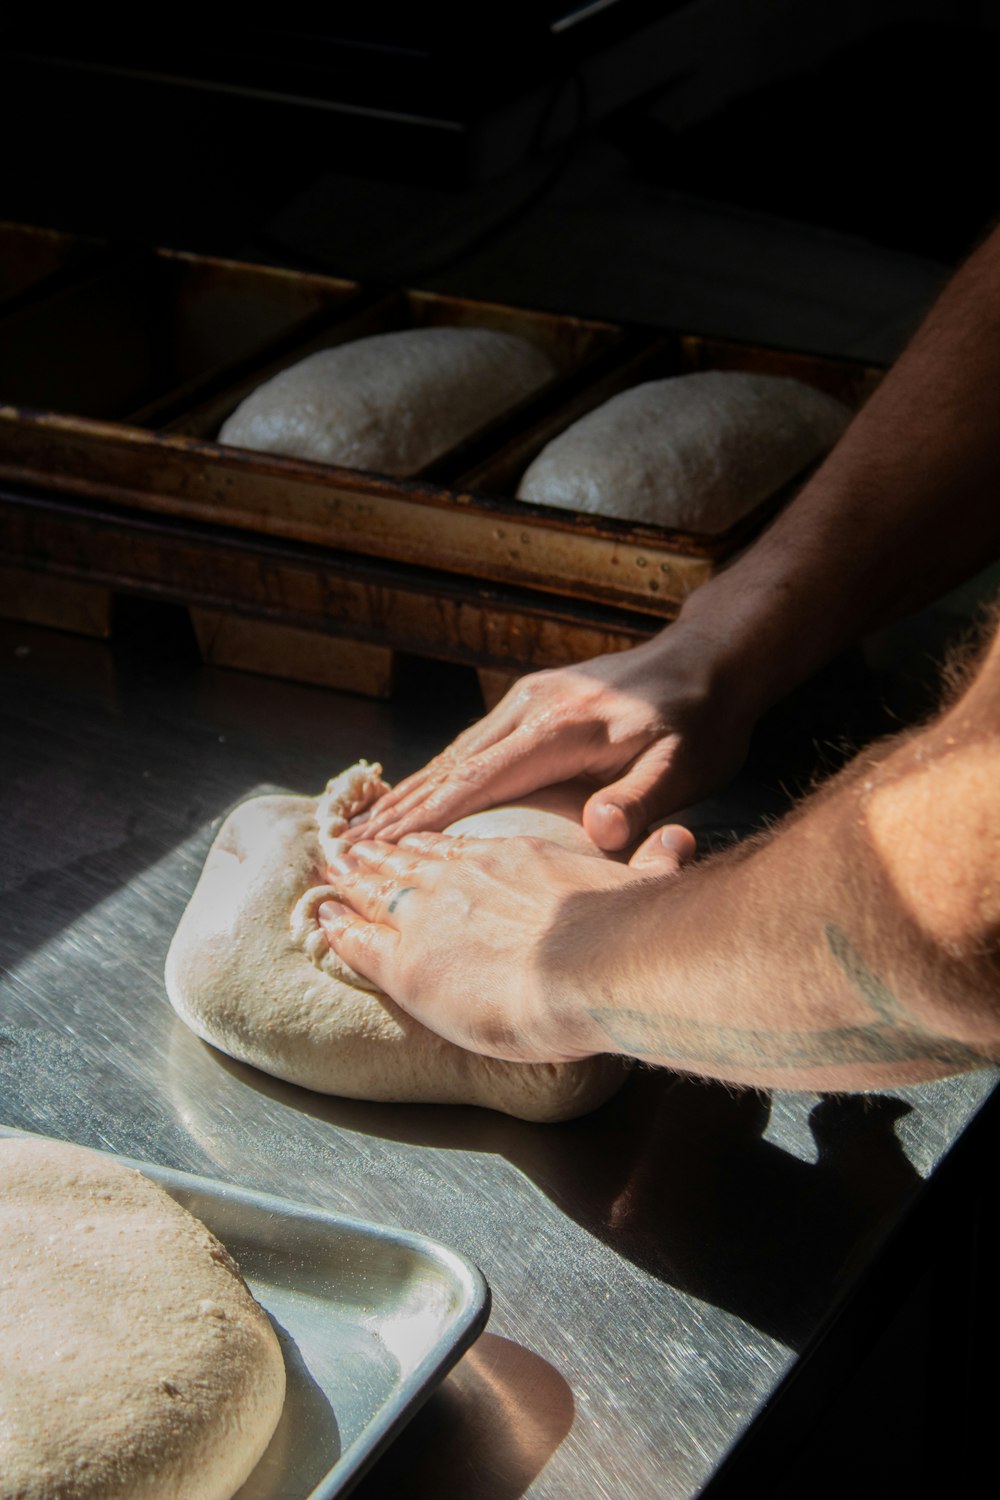 a person is kneading dough into a loaf of bread